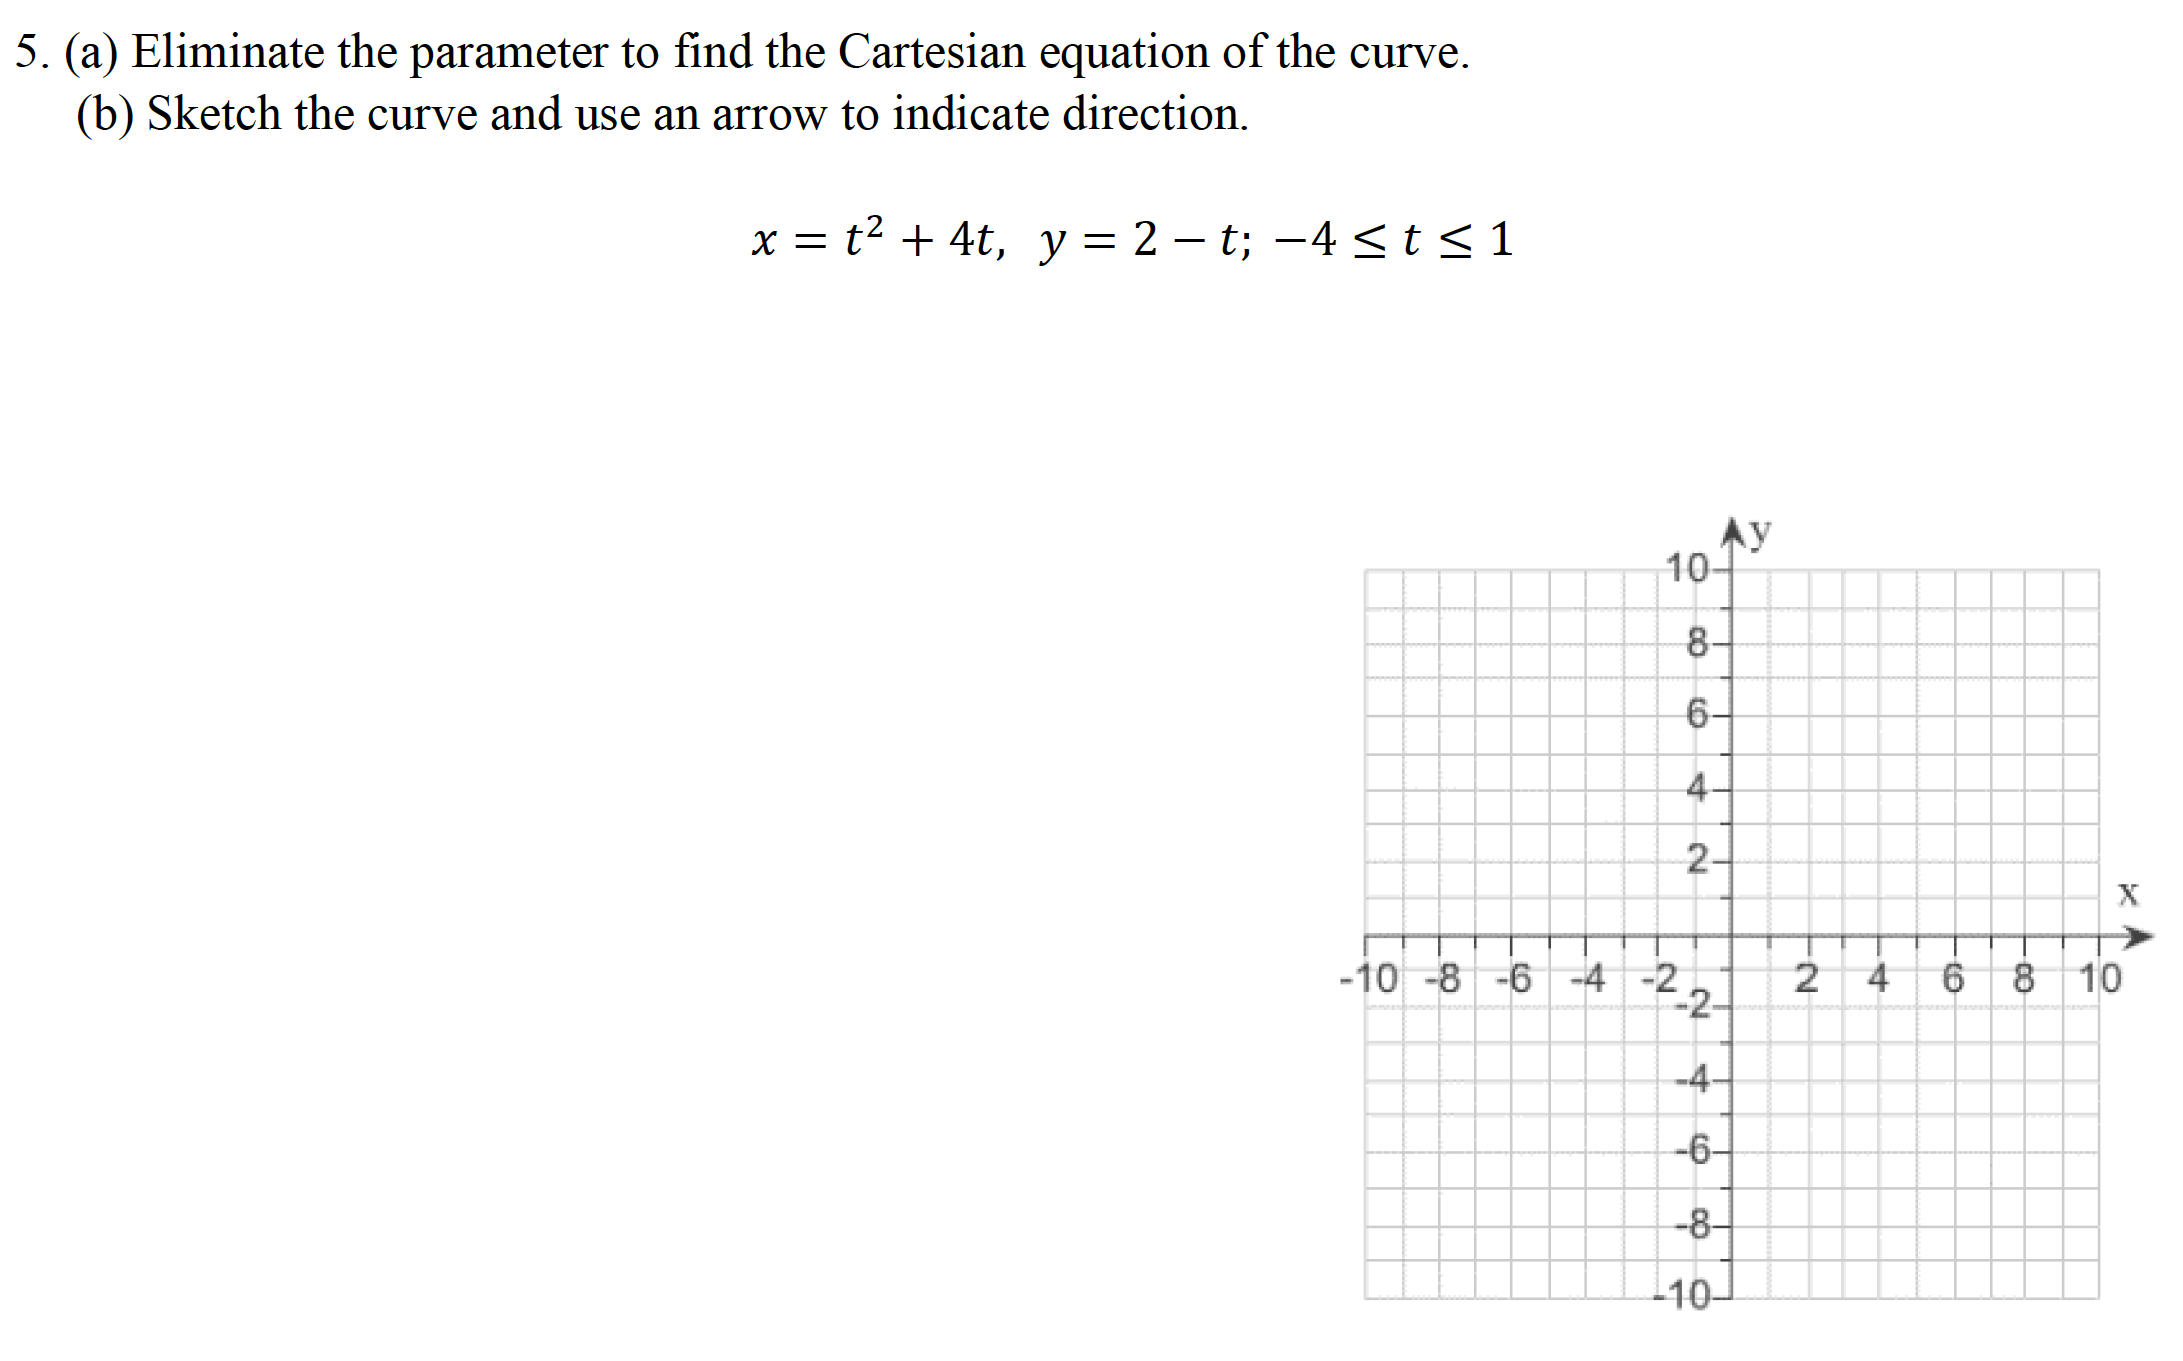 (a) Eliminate the parameter to find the Cartesian equation of the curve.
(b) Sketch the curve and use an arrow to indicate direction.
x = t2 + 4t, y = 2 – t; –4 <t<1
Ay
104
8-
X
-10 -8 -6 -4 -2,
2 4
8 10
-2-
-4-
-6-
-8-
10-
6.
4.
2.
